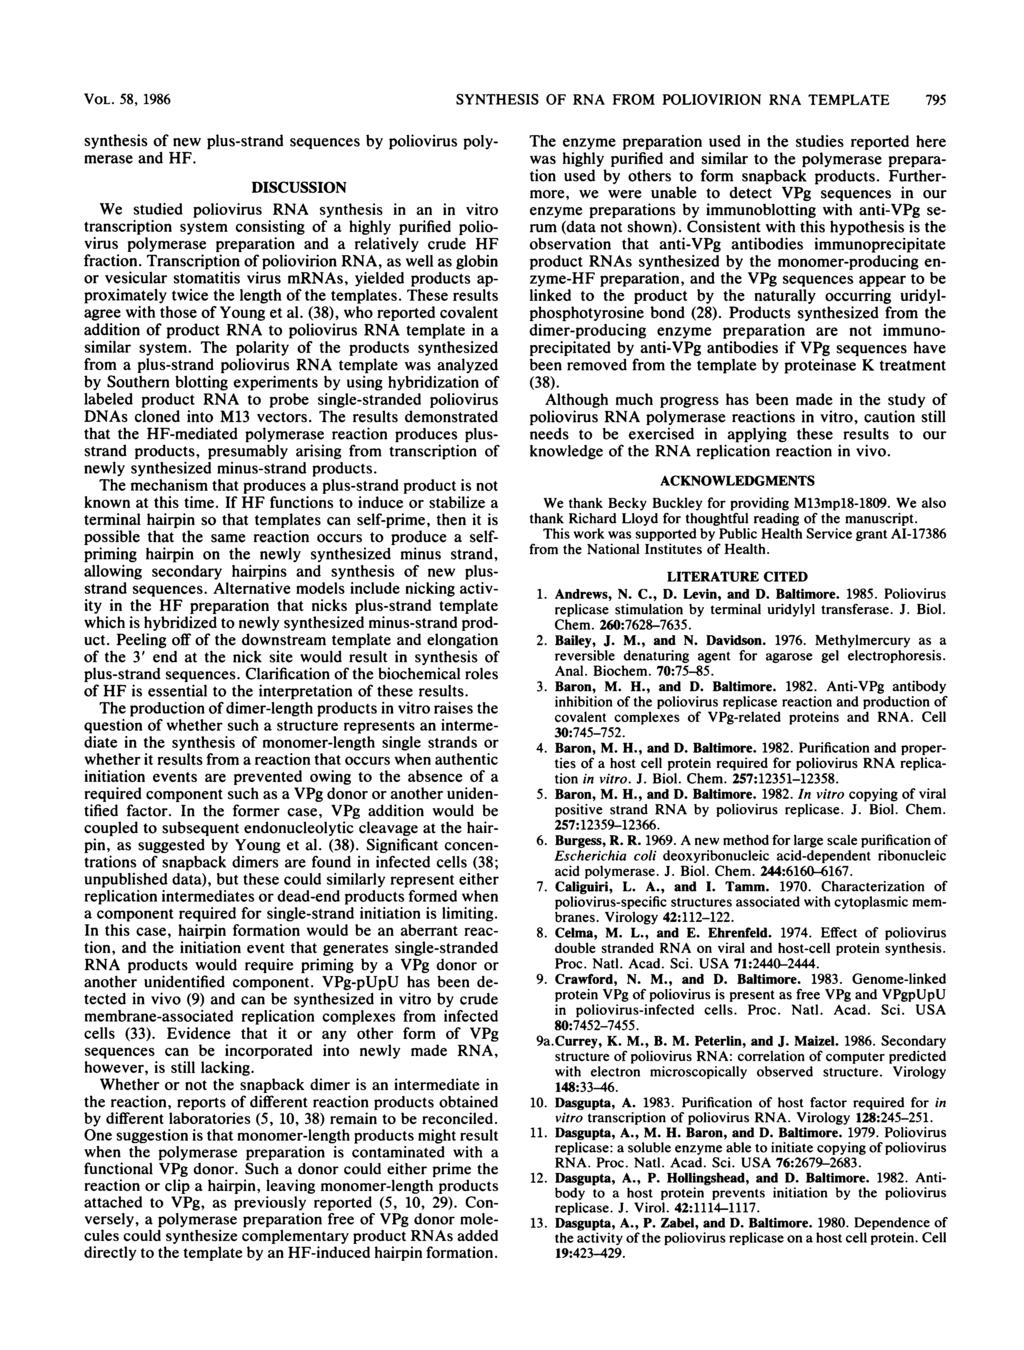 VOL. 58, 1986 SYNTHESIS OF RNA FROM POLIOVIRION RNA TEMPLATE 795 synthesis of new plus-strand sequences by poliovirus polymerase and HF.